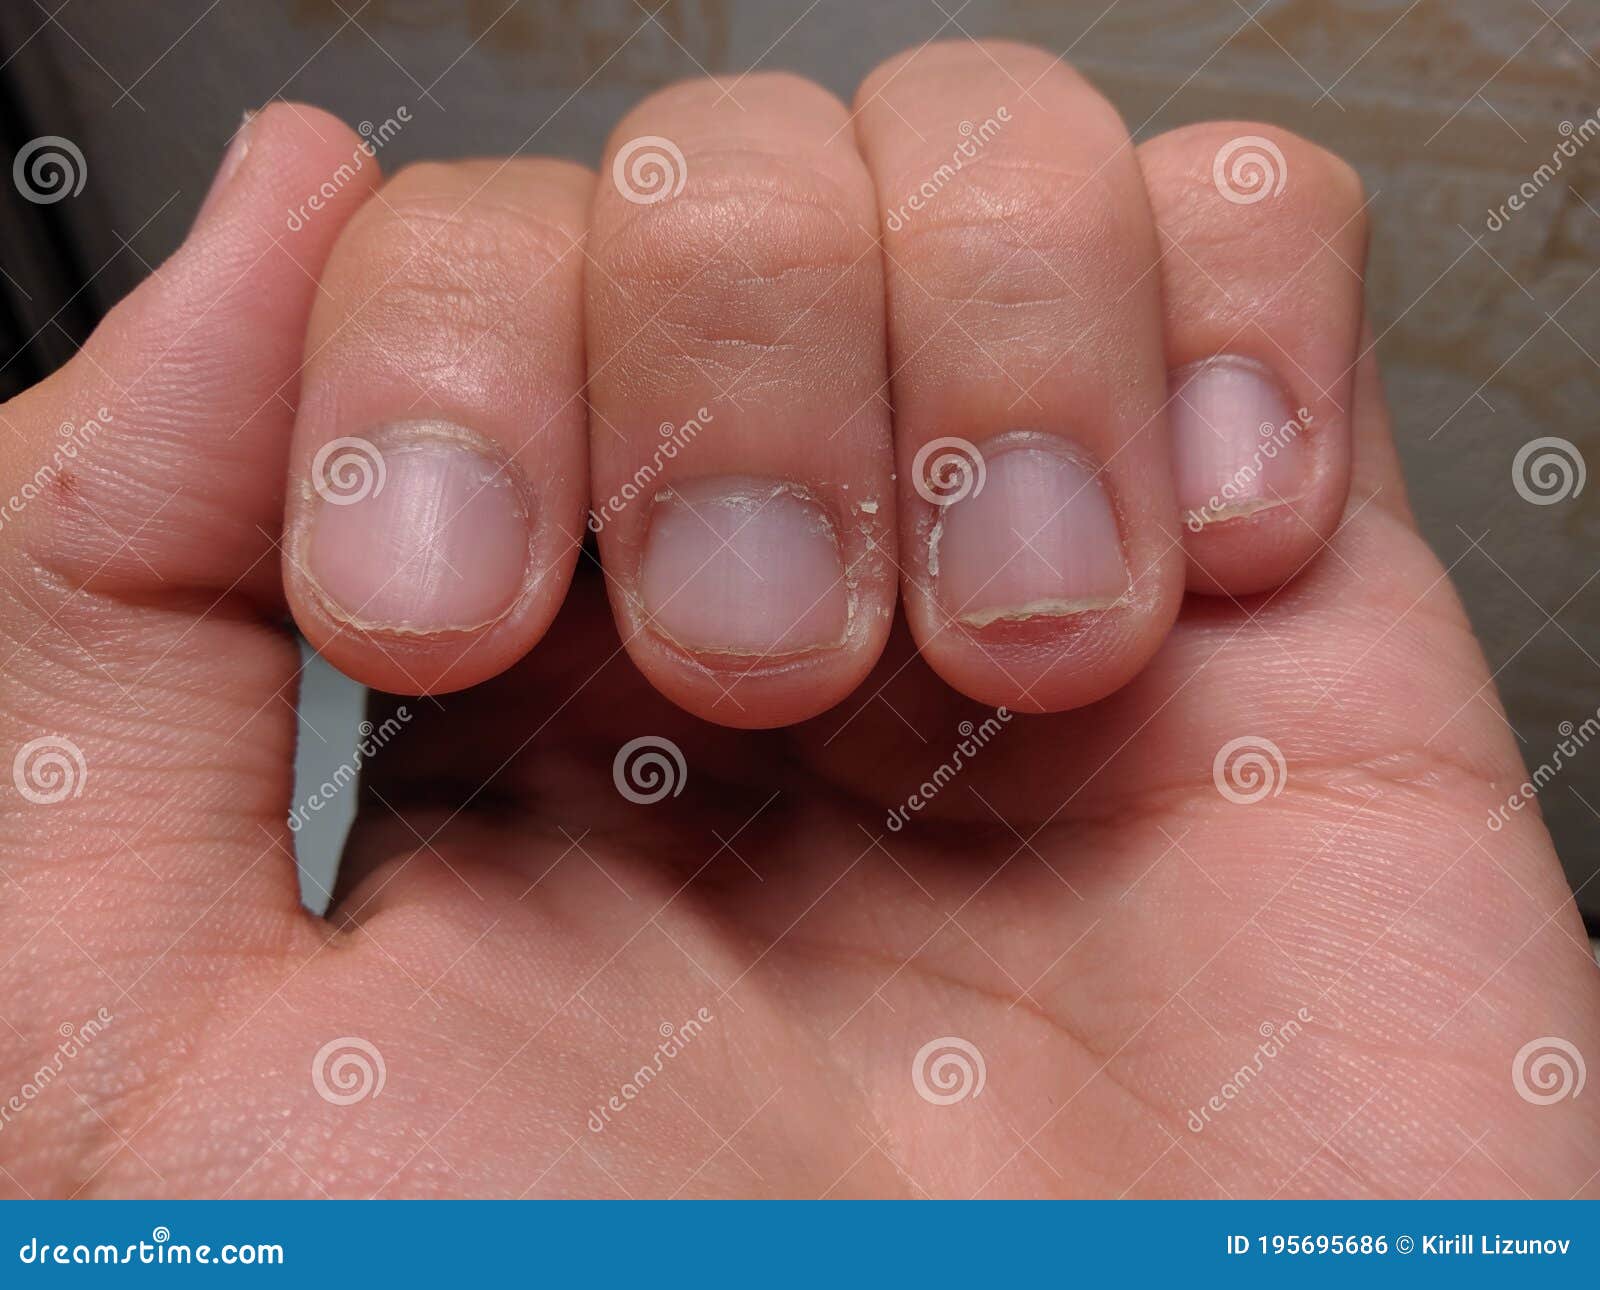 unkempt hand with fingers. fingers with cuticles and bad nails.